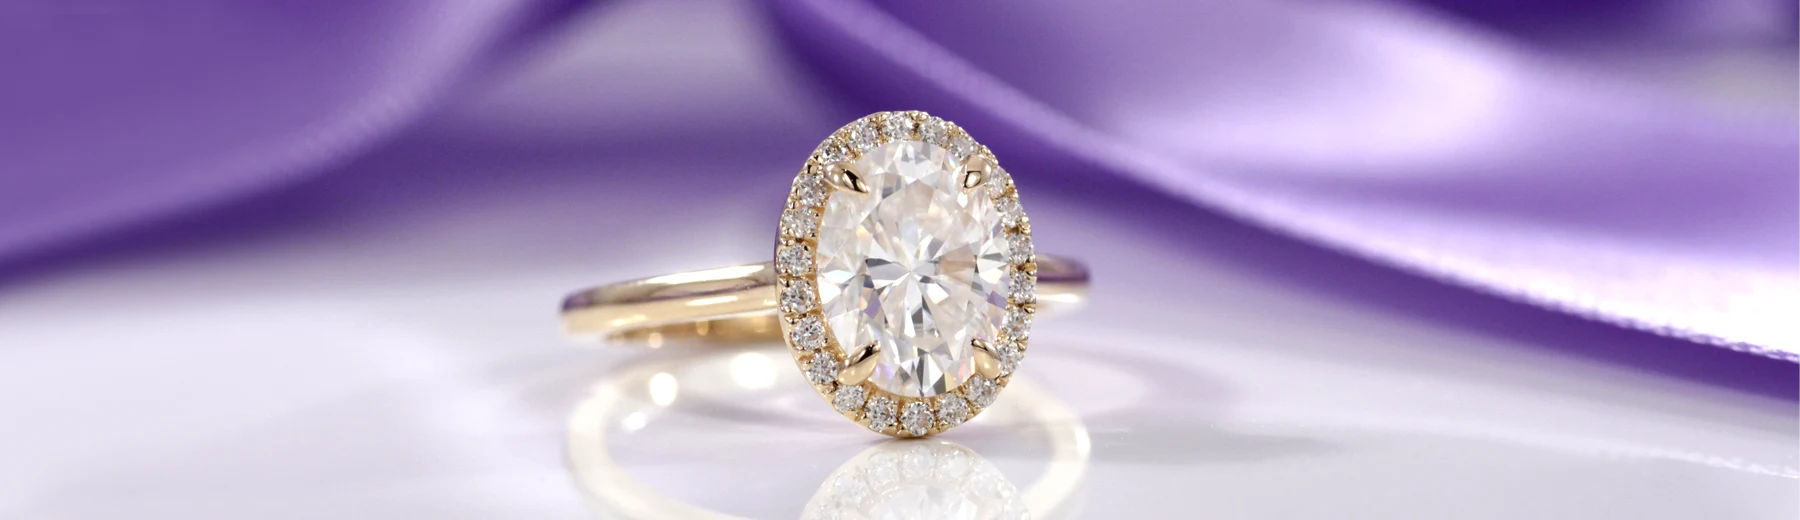 halo and hidden-halo engagement rings featuring lab diamonds on sale at Quorri Canada